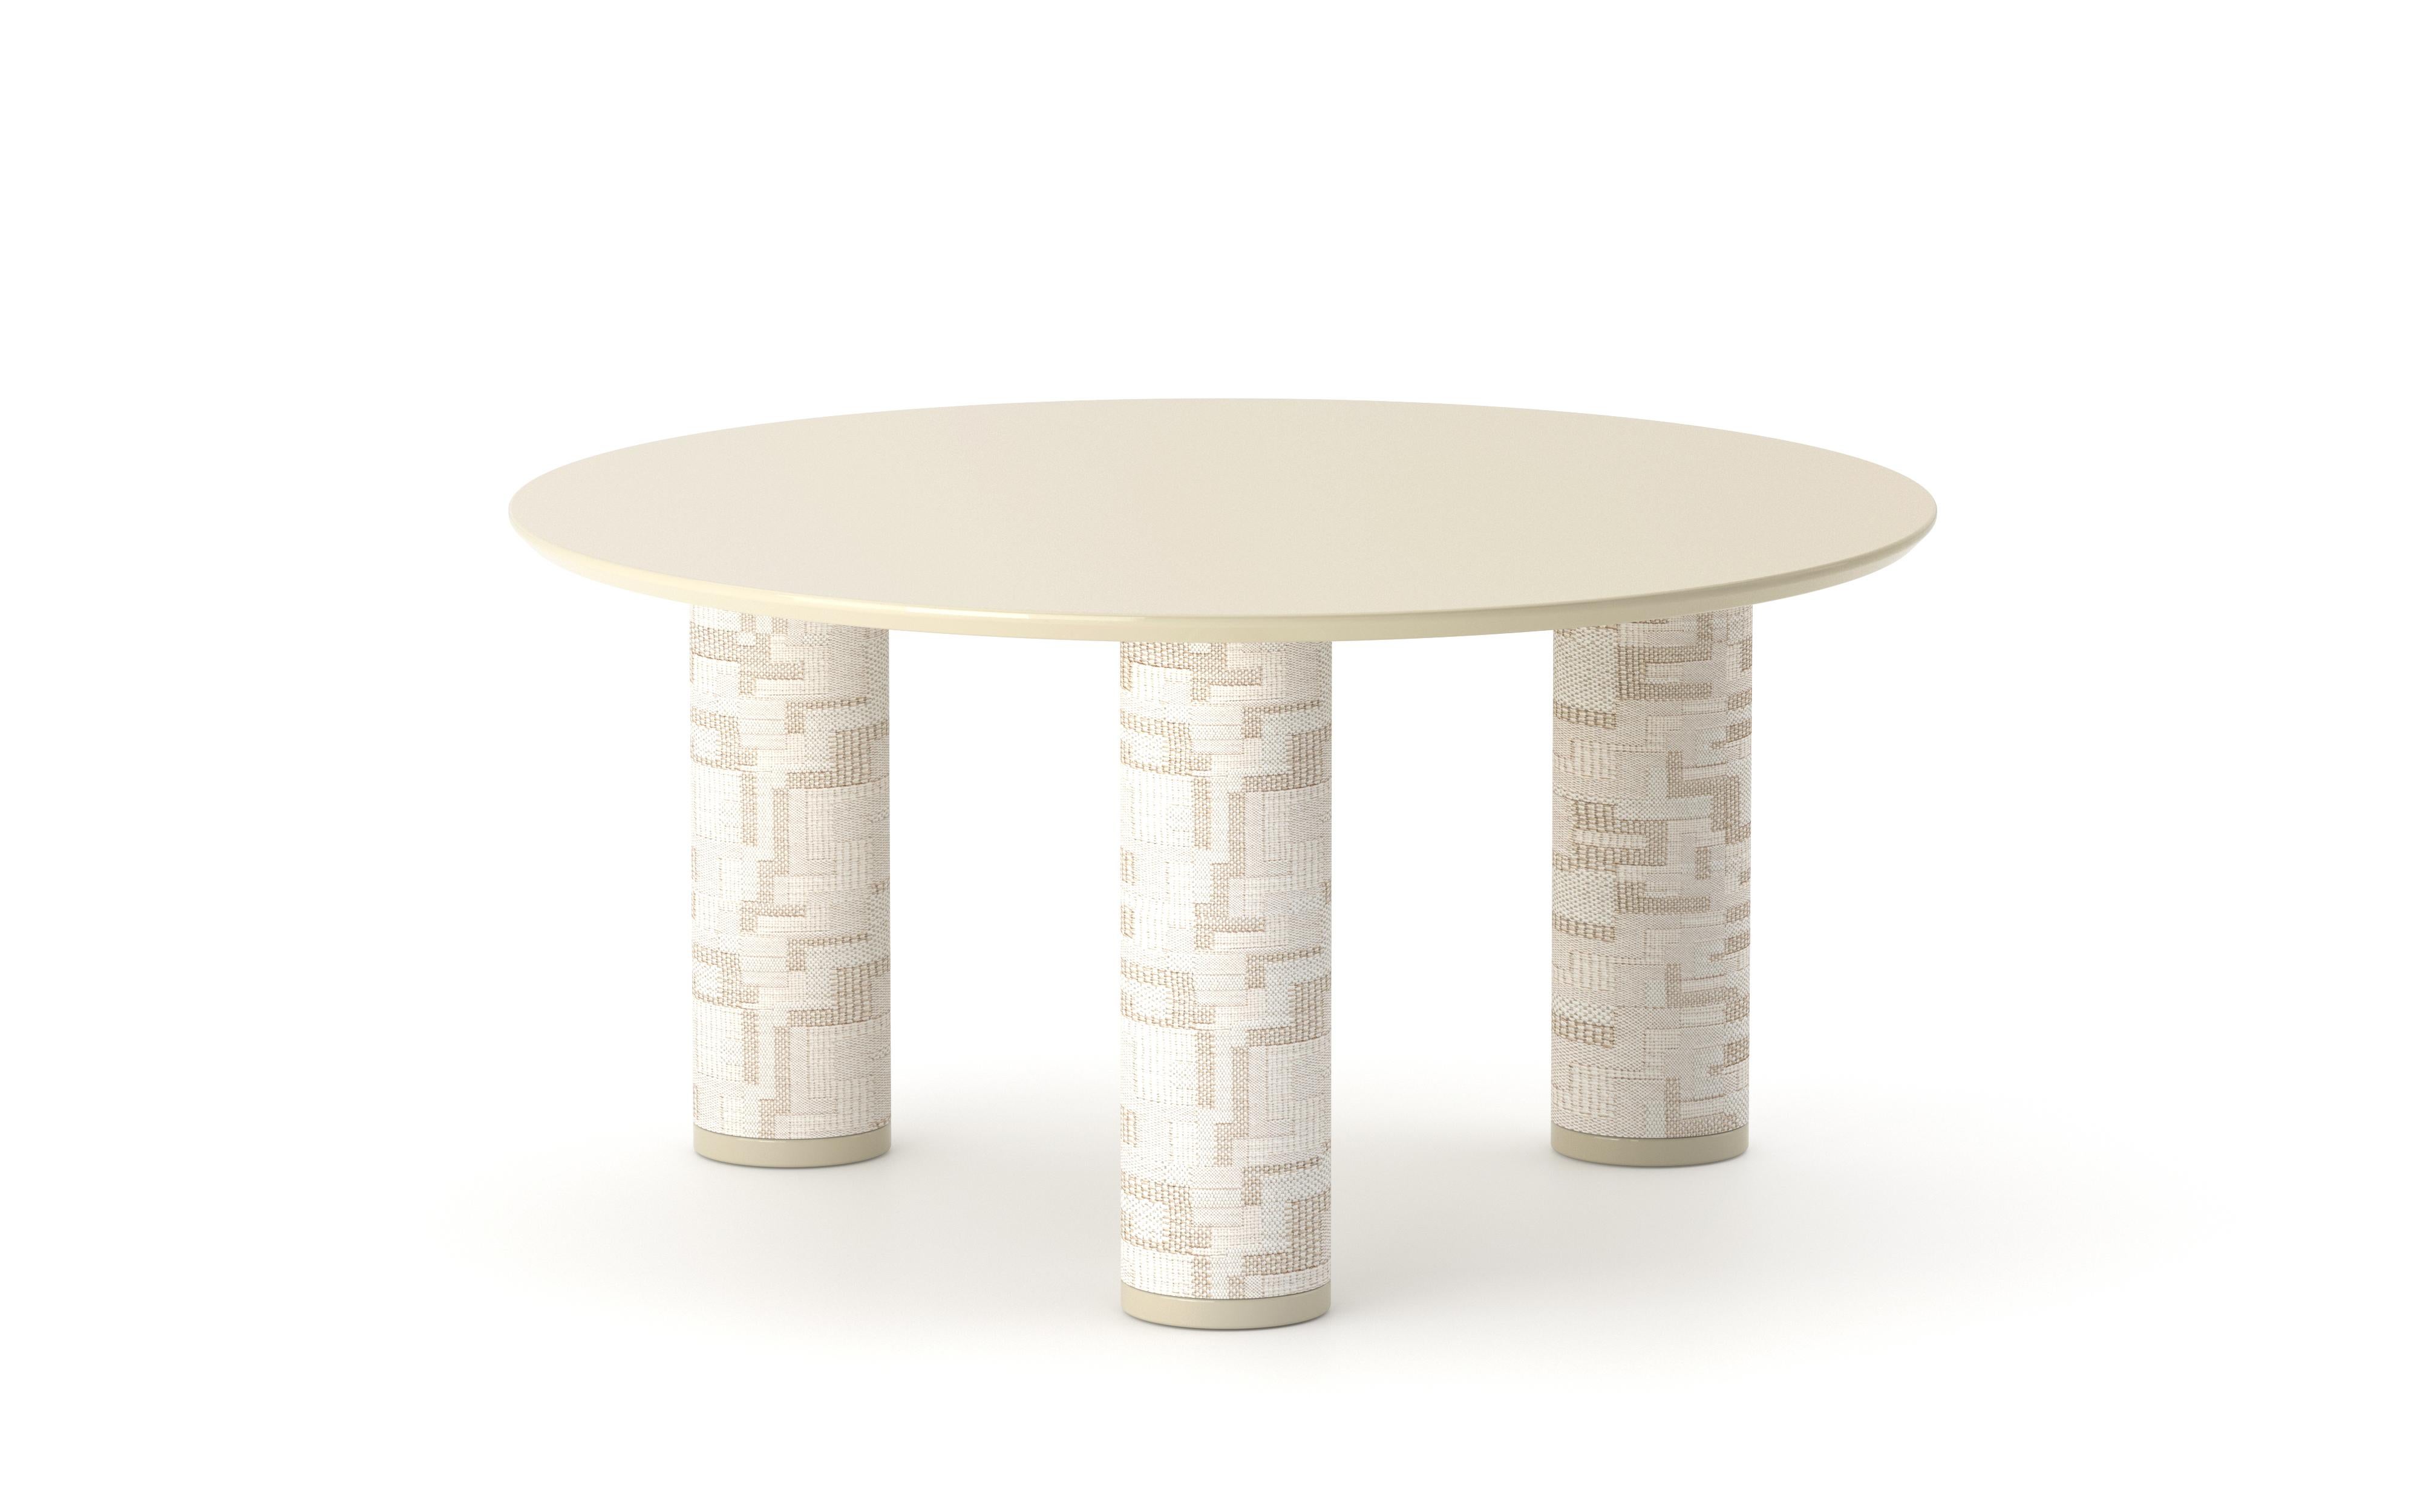 Uma round 70 coffee table by Purho
Dimensions: D 70 x H 35 cm
Materials: Resin, fabric upholstered legs.
Available in other colors.

UMA Round 70 is a low table from the collection of the same name designed by Ludovica+Roberto Palomba for P + C